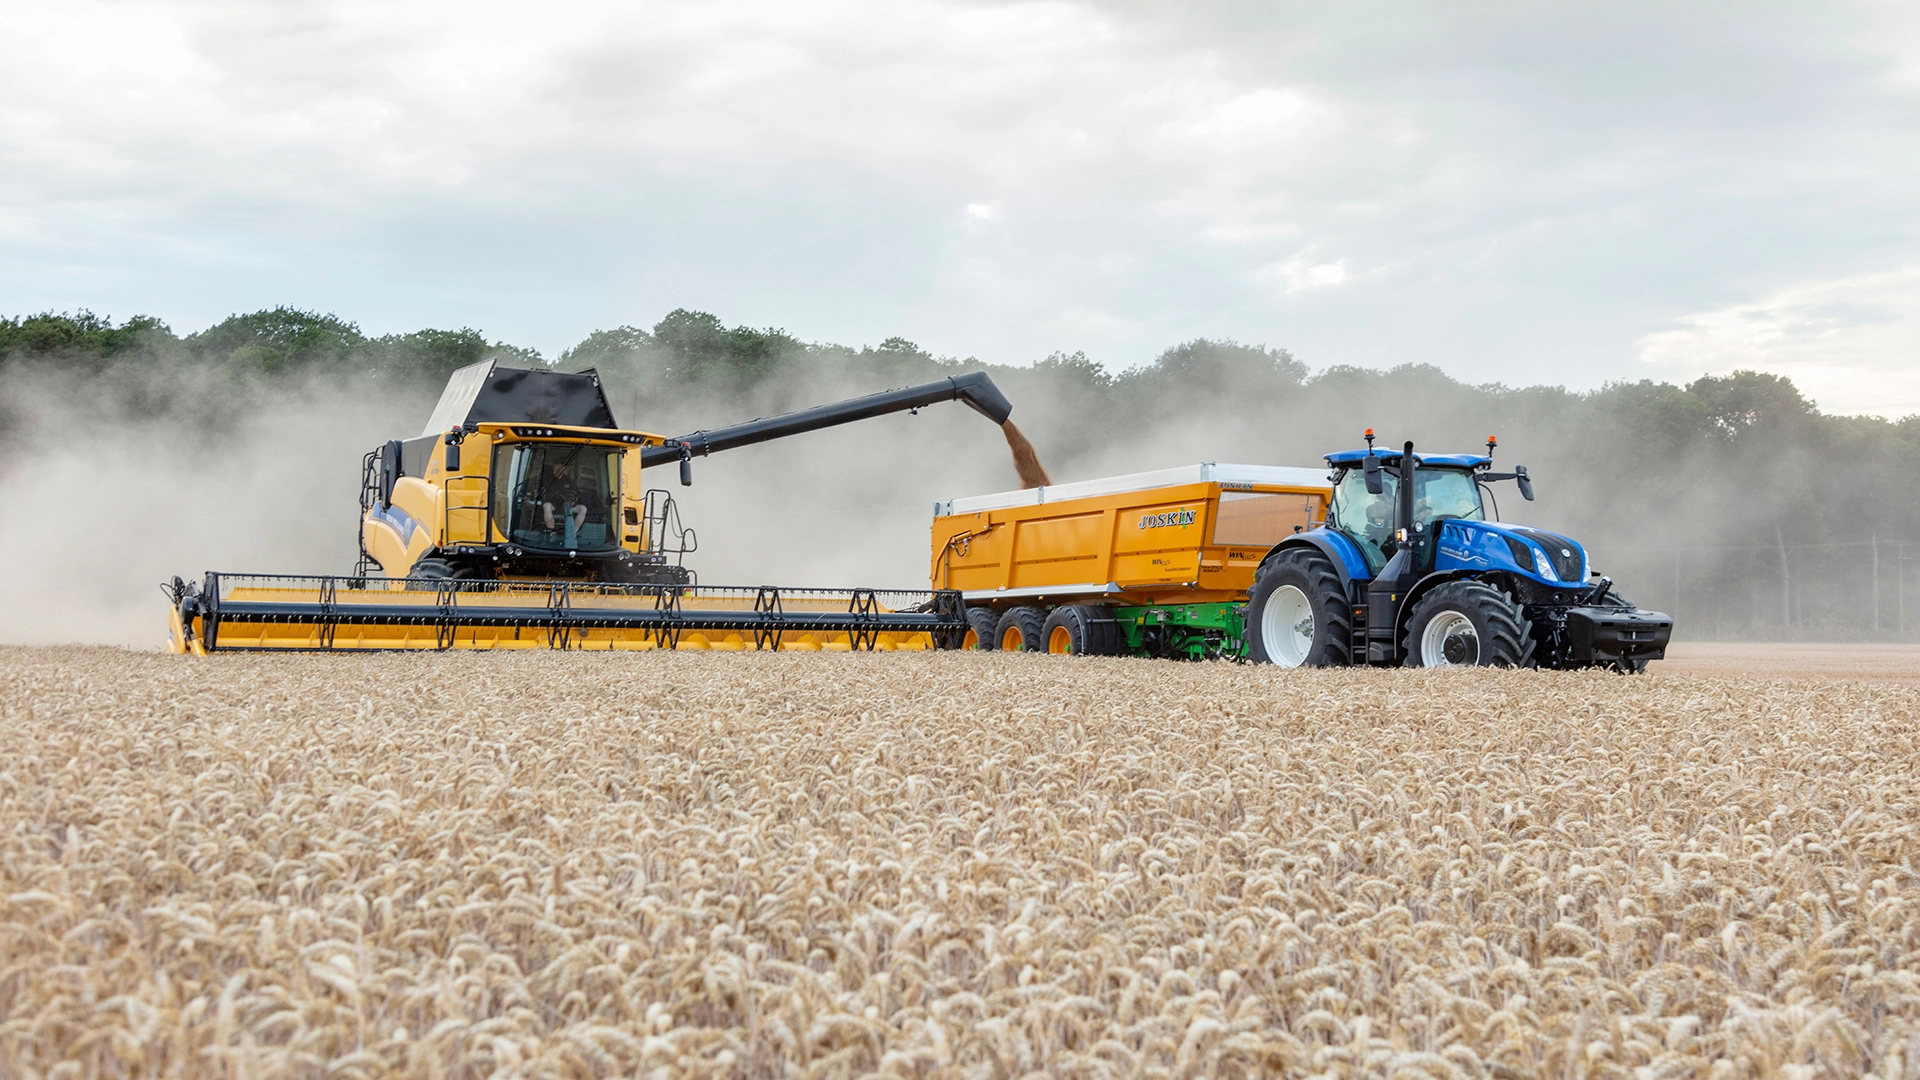 T7 Heavy Duty With PLM Intelligence Tractor efficiently operating in a farming environment